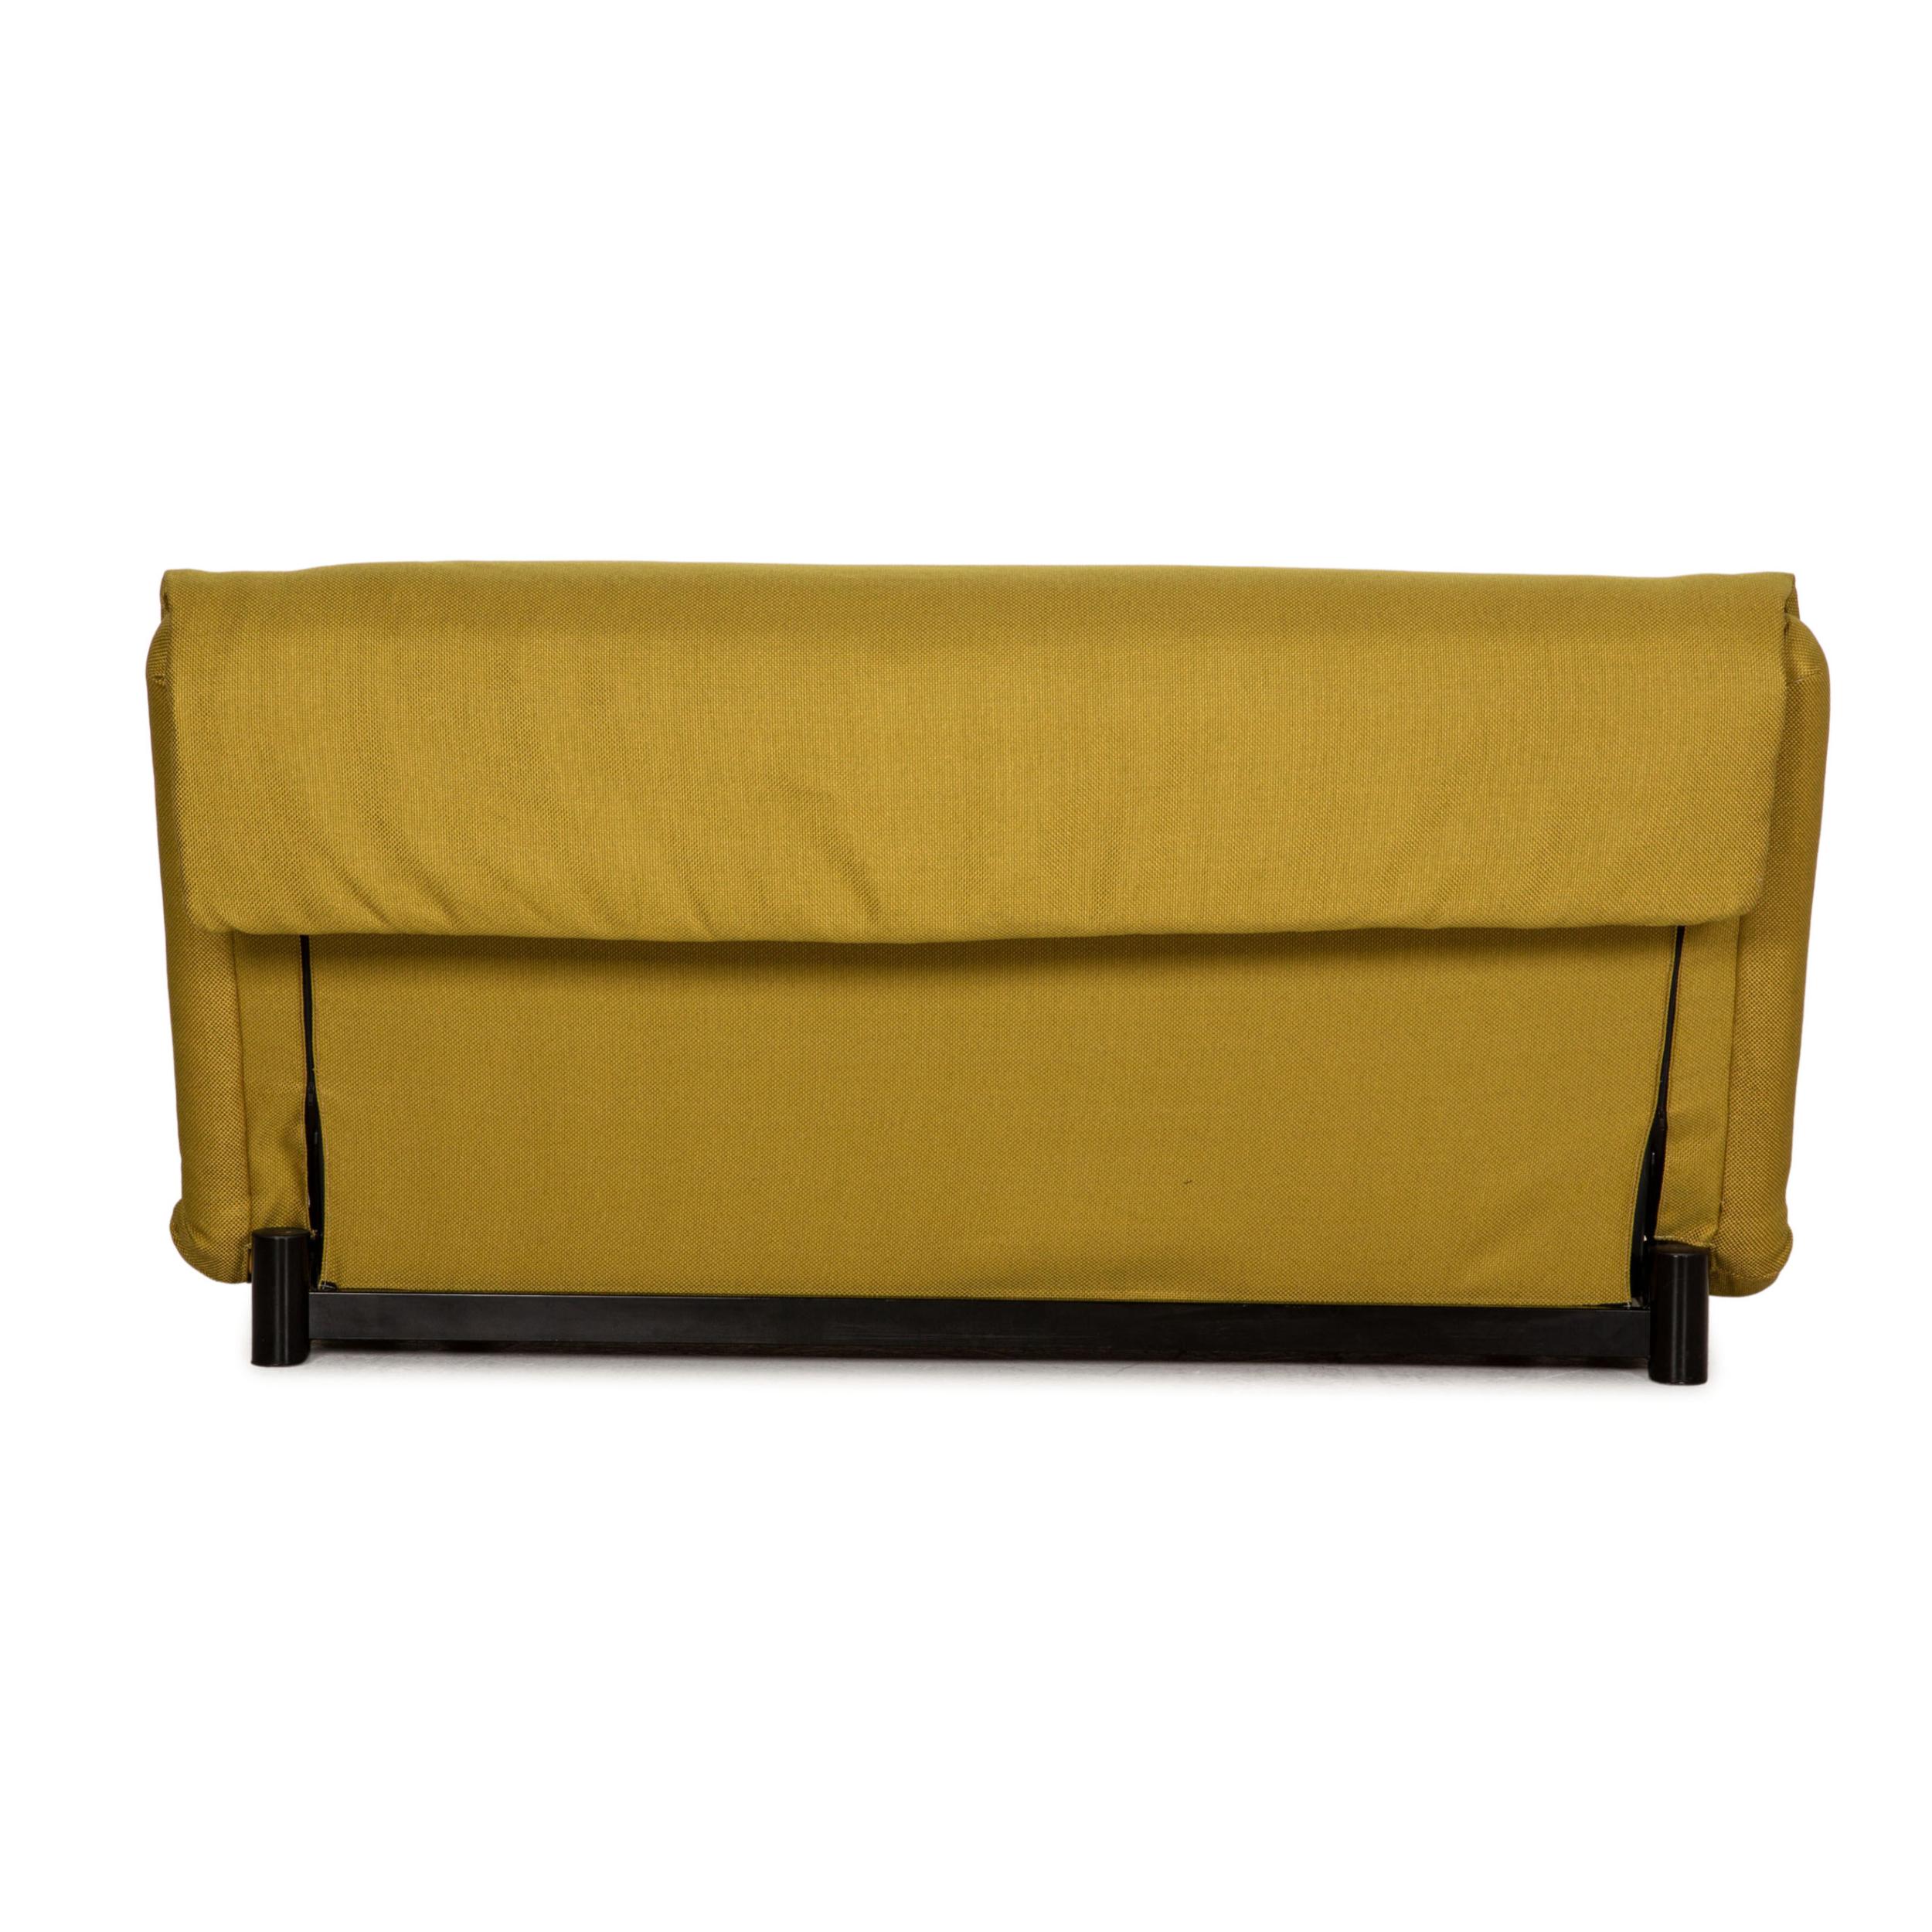 Ligne Roset Multy Fabric Sofa Yellow Three-Seater Couch Function Sleeping For Sale 2